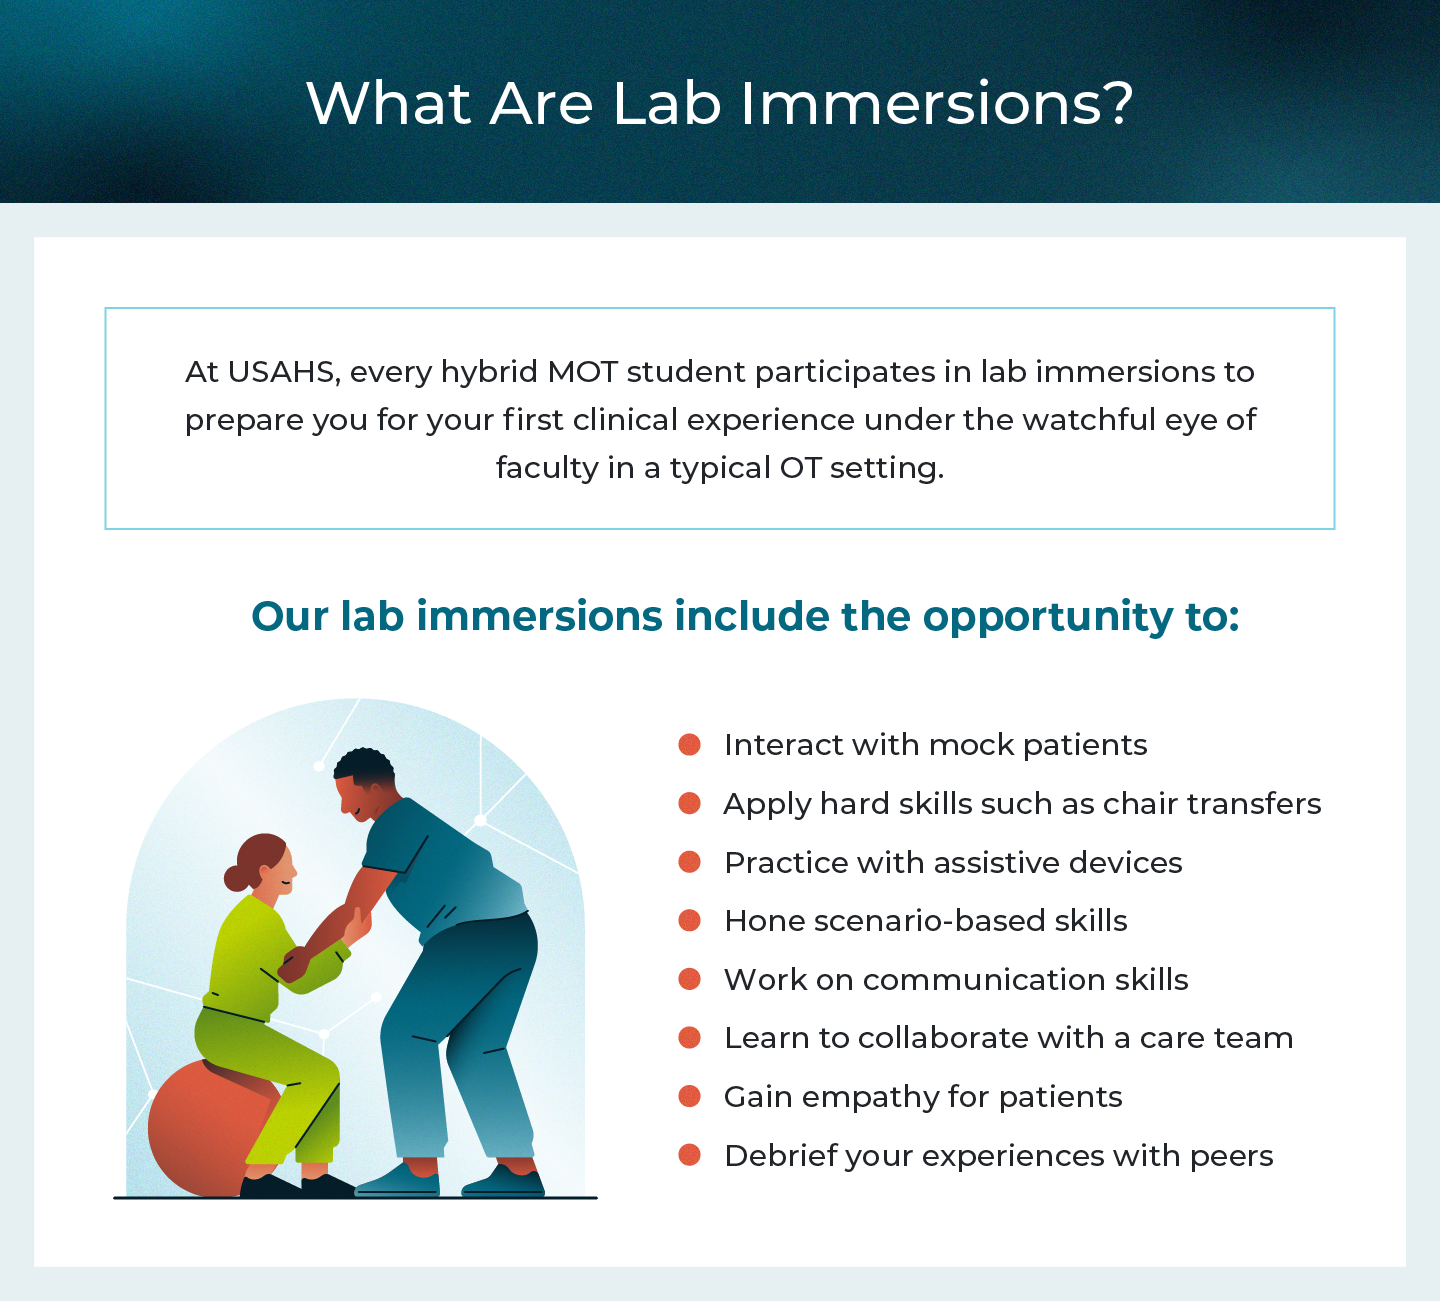 Description of lab immersions at USAHS.